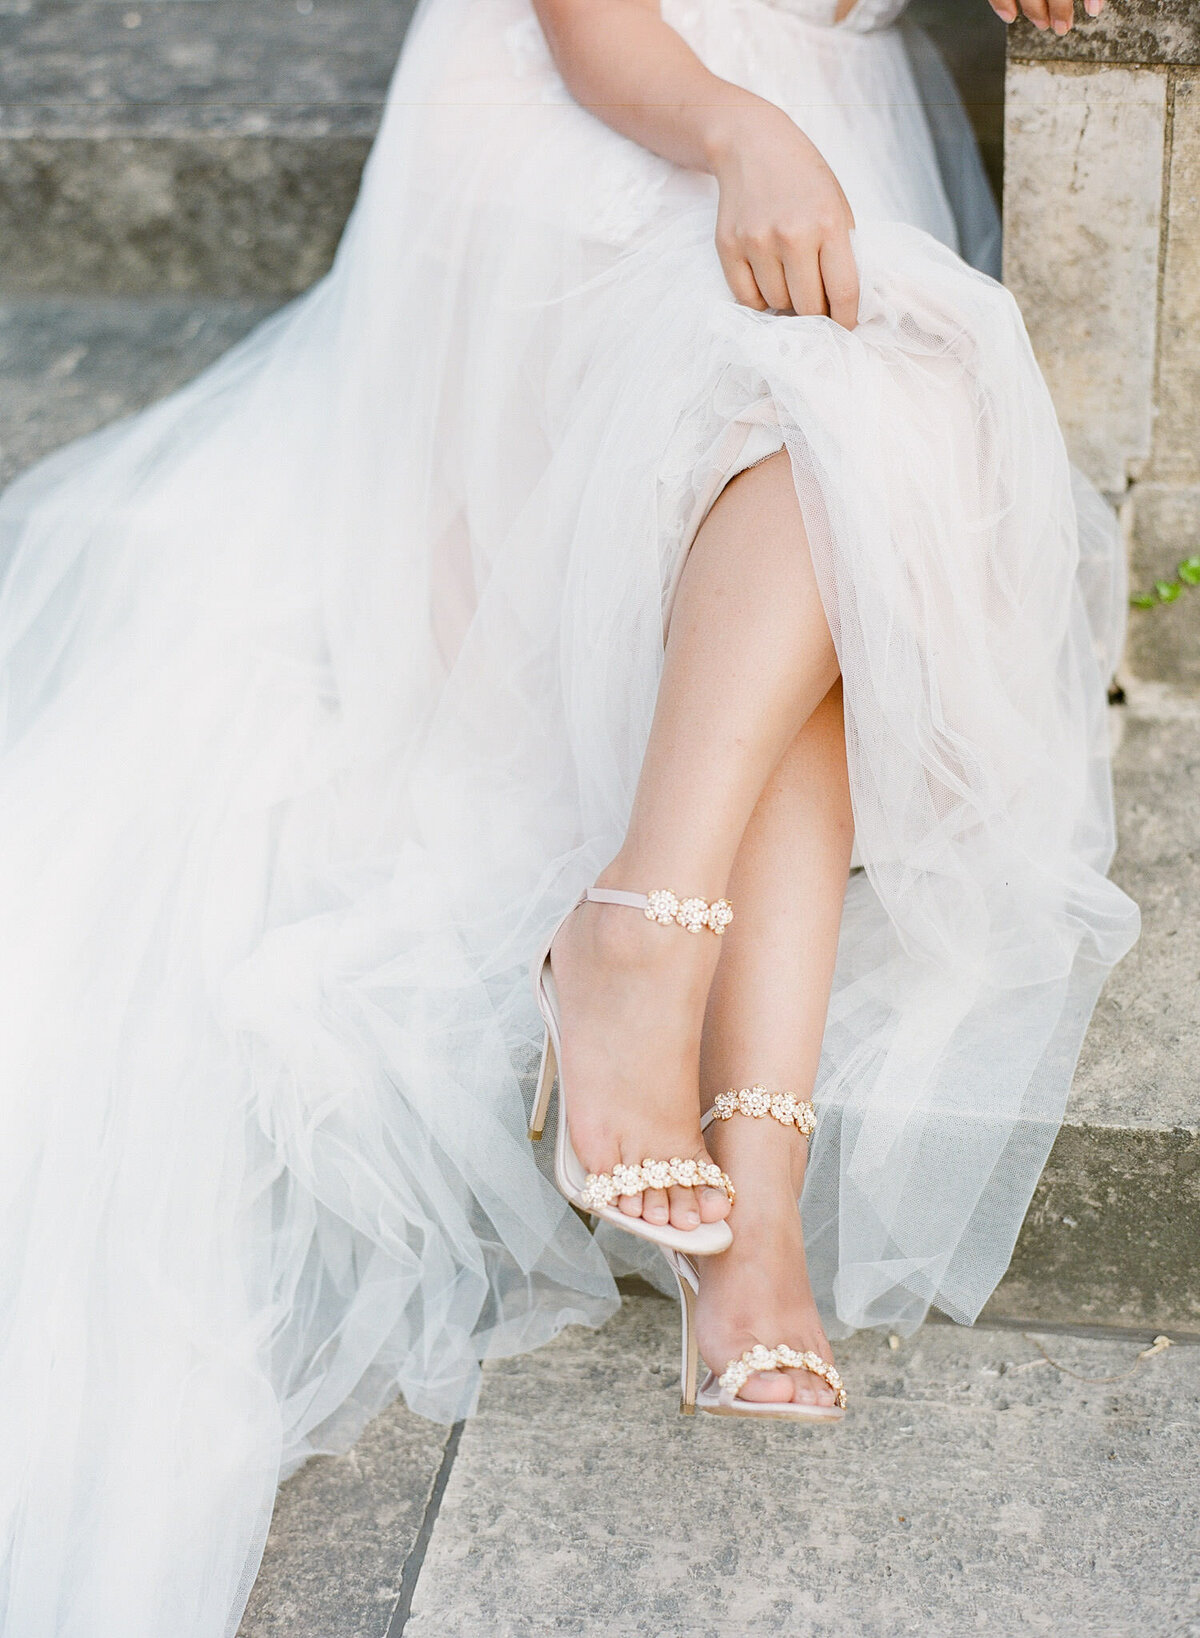 bella belle shoes at a wisconsin wedding